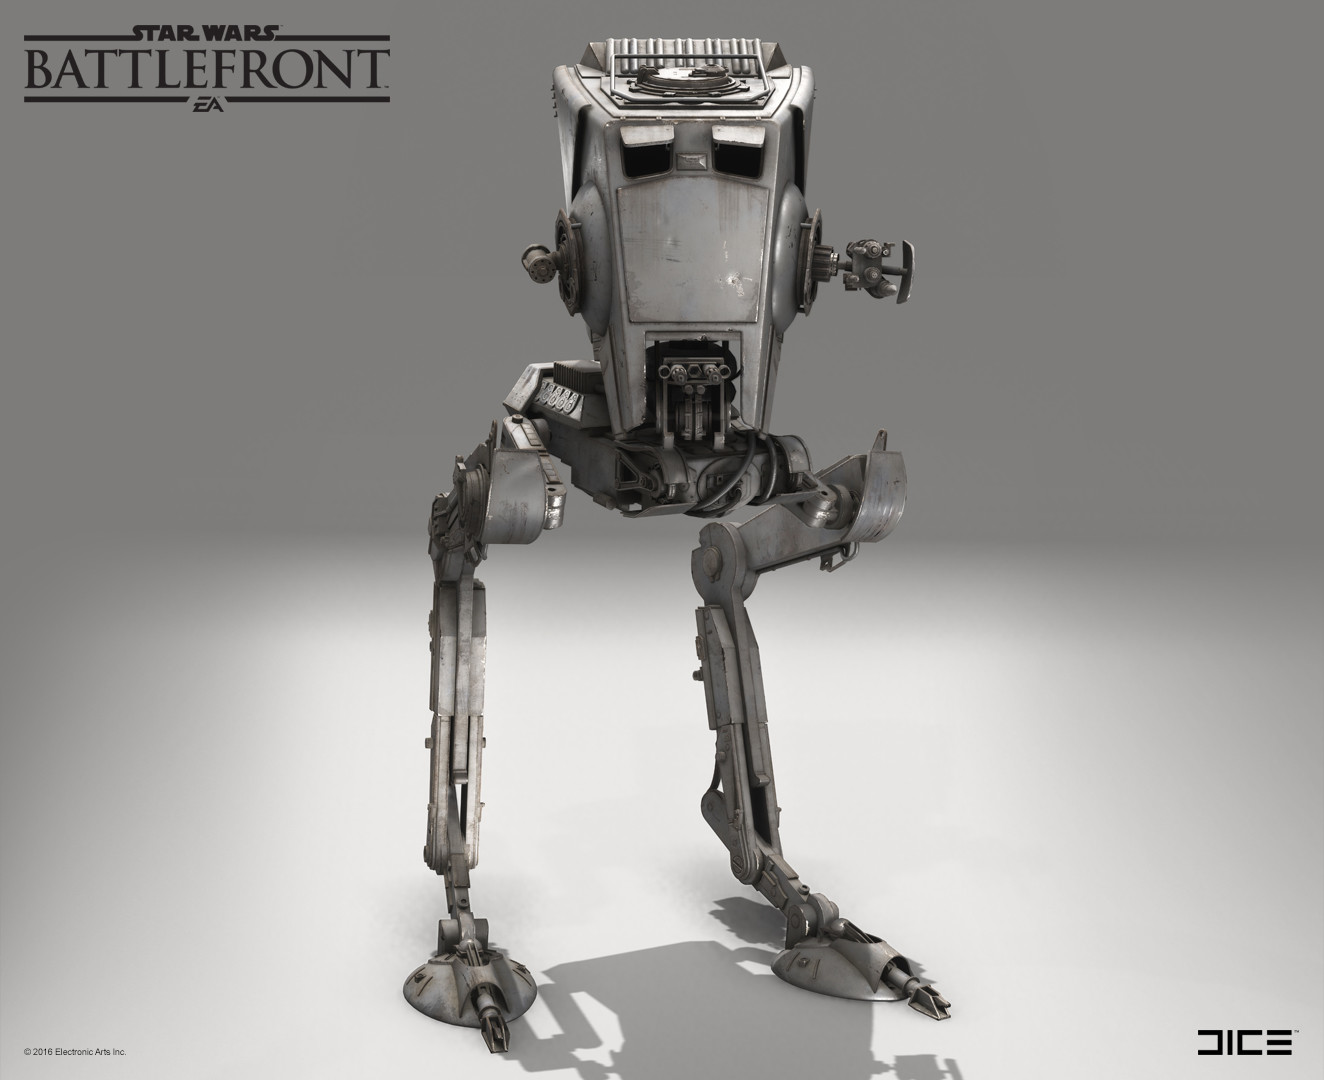 https://static.wikia.nocookie.net/battlefront/images/c/c4/AT-ST_model.jpg/revision/latest?cb=20160903163333